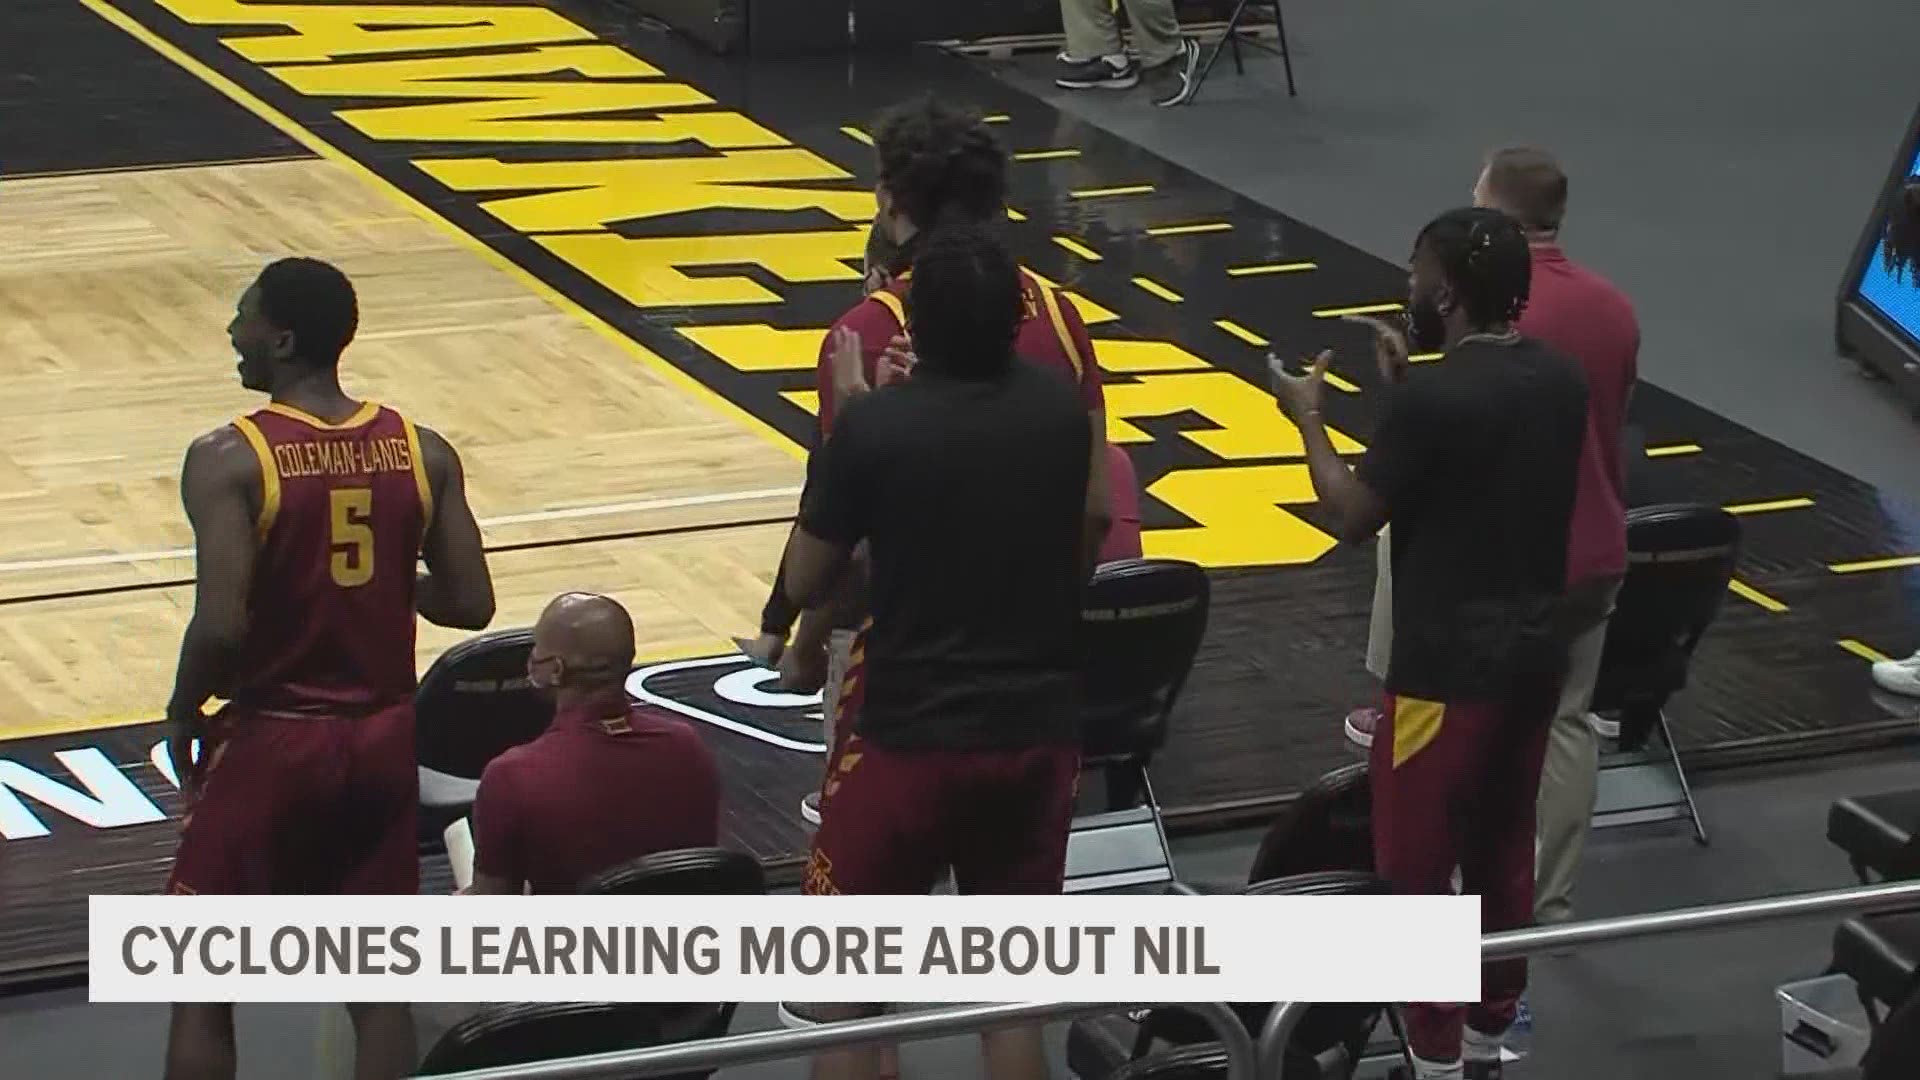 Iowa State men's basketball players are among those still eyeing possibilities with NIL.